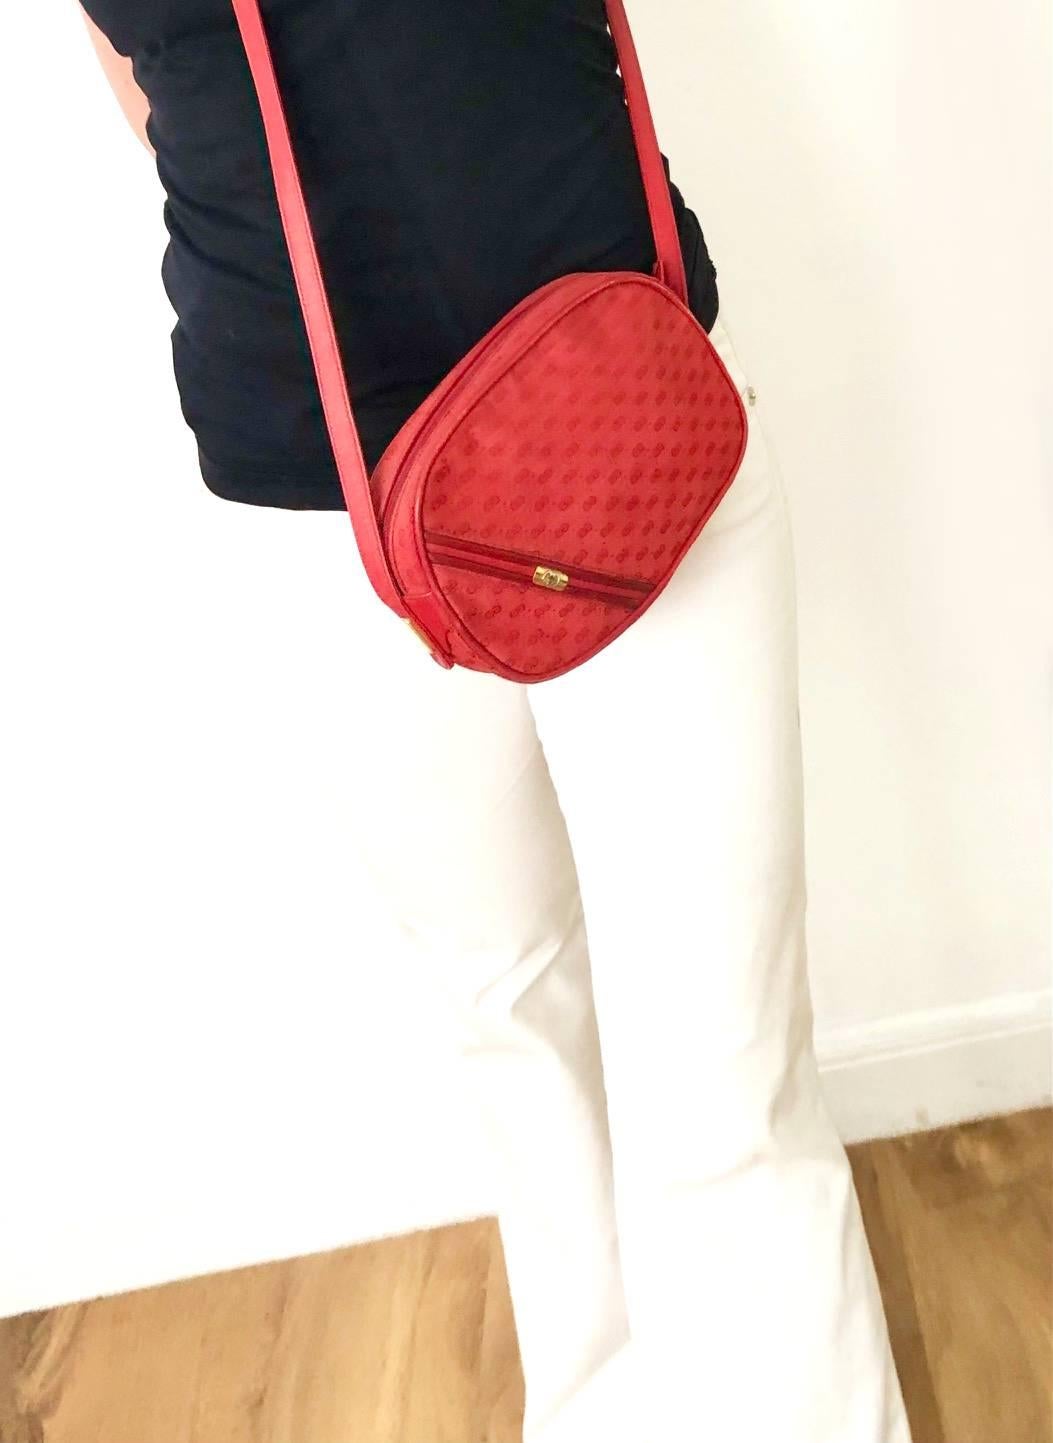 FREE and WORLDWIDE DELIVERY 

1970's / 1980's bright red Gucci canvas and leather shoulder cross body bag, red GG monogram, double strap detail with gold metal logo, top zip closure, GG logo charm, beige leather interior, gold metal logo with serial